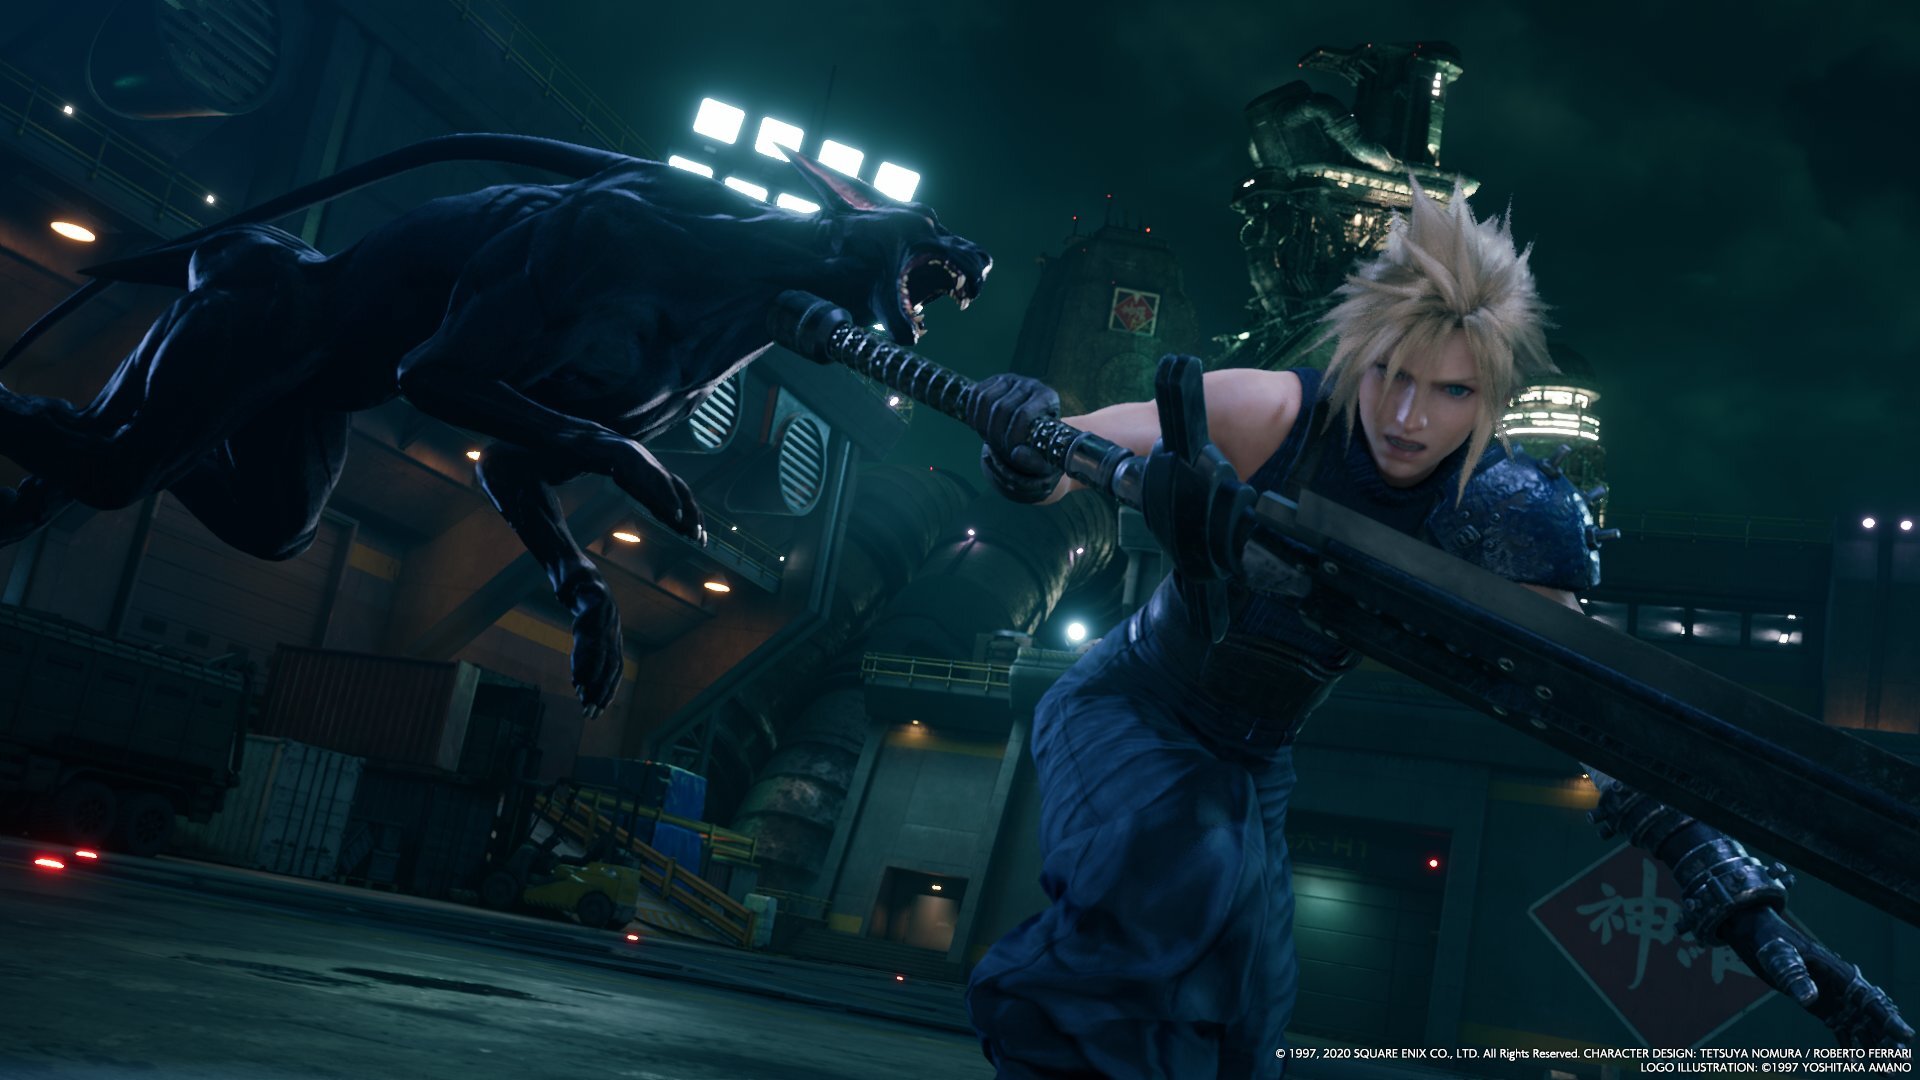 Final Fantasy VII Remake review – a classic game reaches new